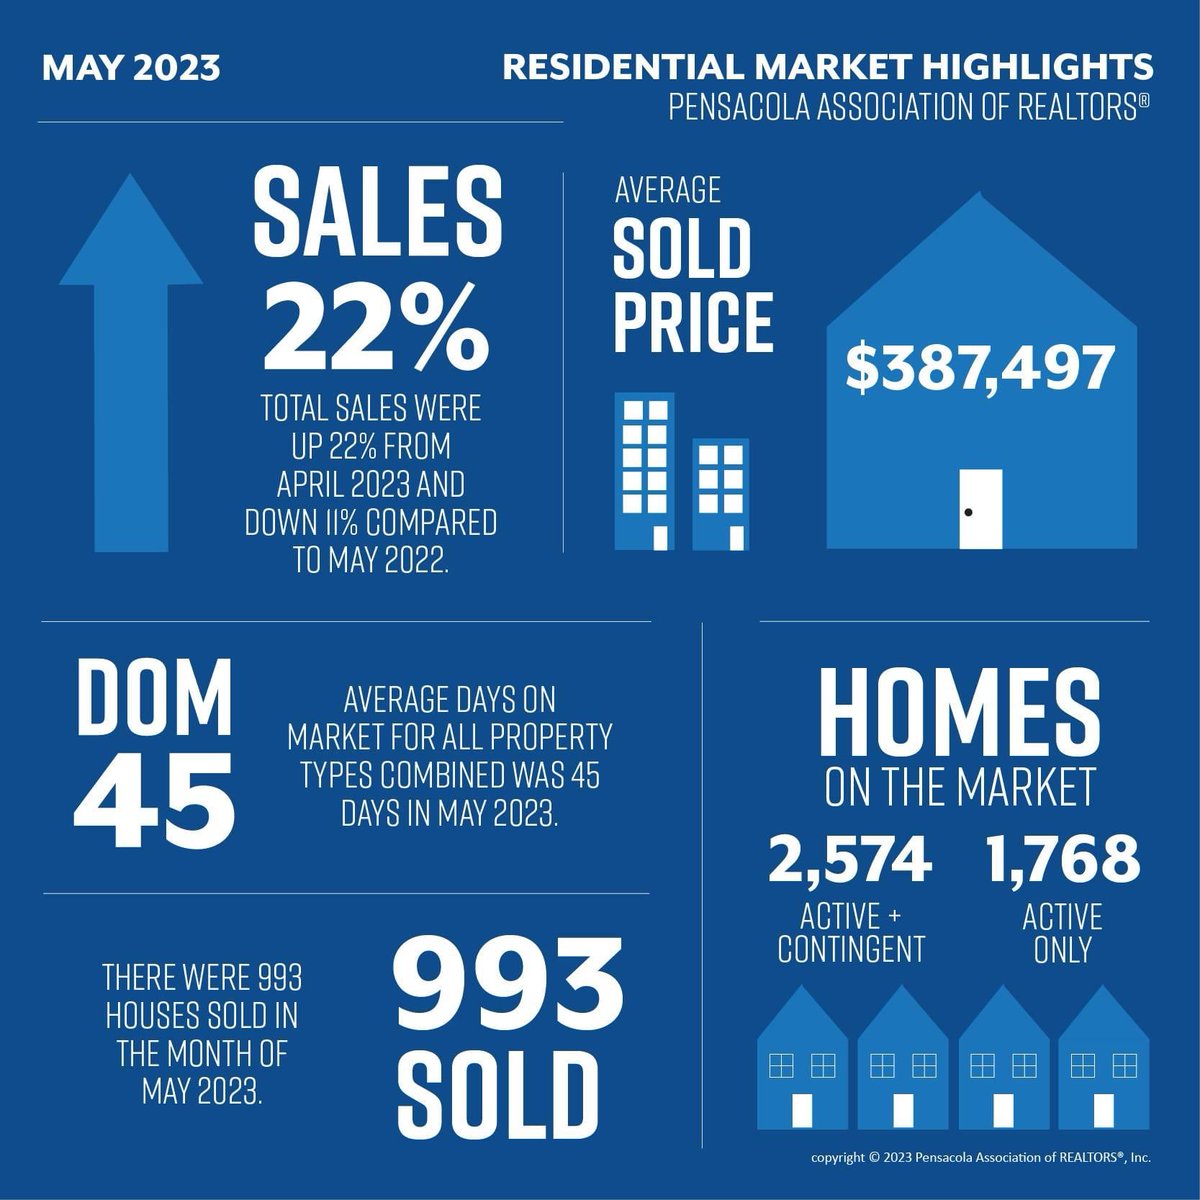 Last month, sales were up 22% compared to April 2023. 🏡🎉
Pensacola Association is amazing  WalterPierce.com Realtor® #OwntheLifestyle™ 
#PensacolaRealEstate #PensacolaHouses #PensacolaHomes #PensacolaREALTORS #PensacolaREALTOR